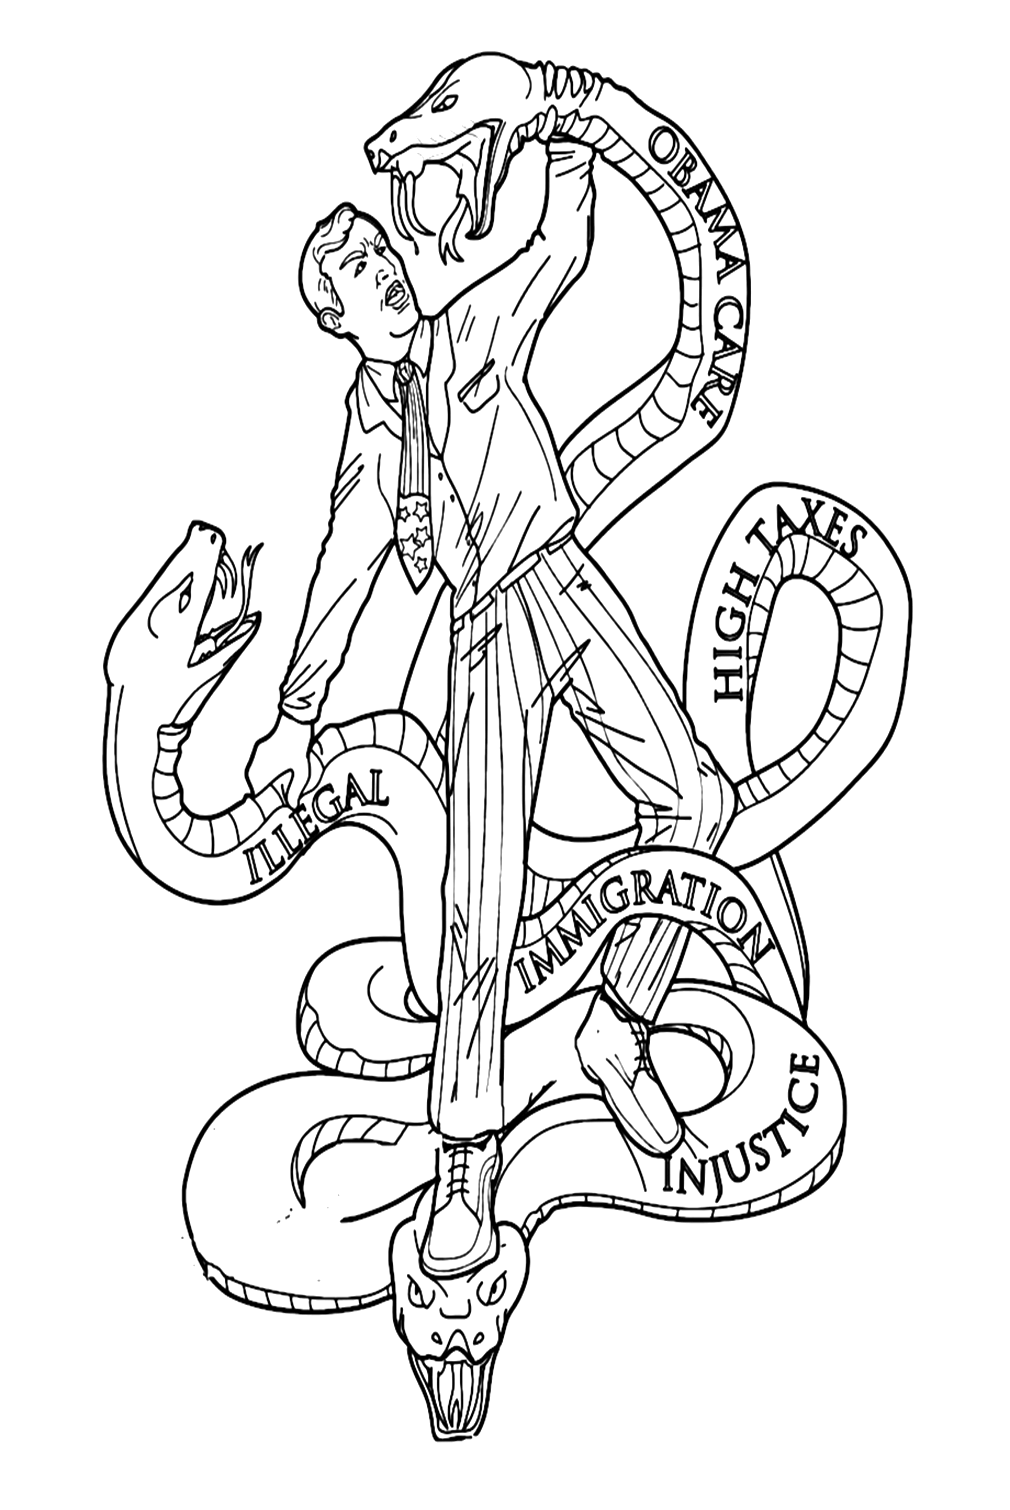 Hydra Coloring Page Free from Hydra